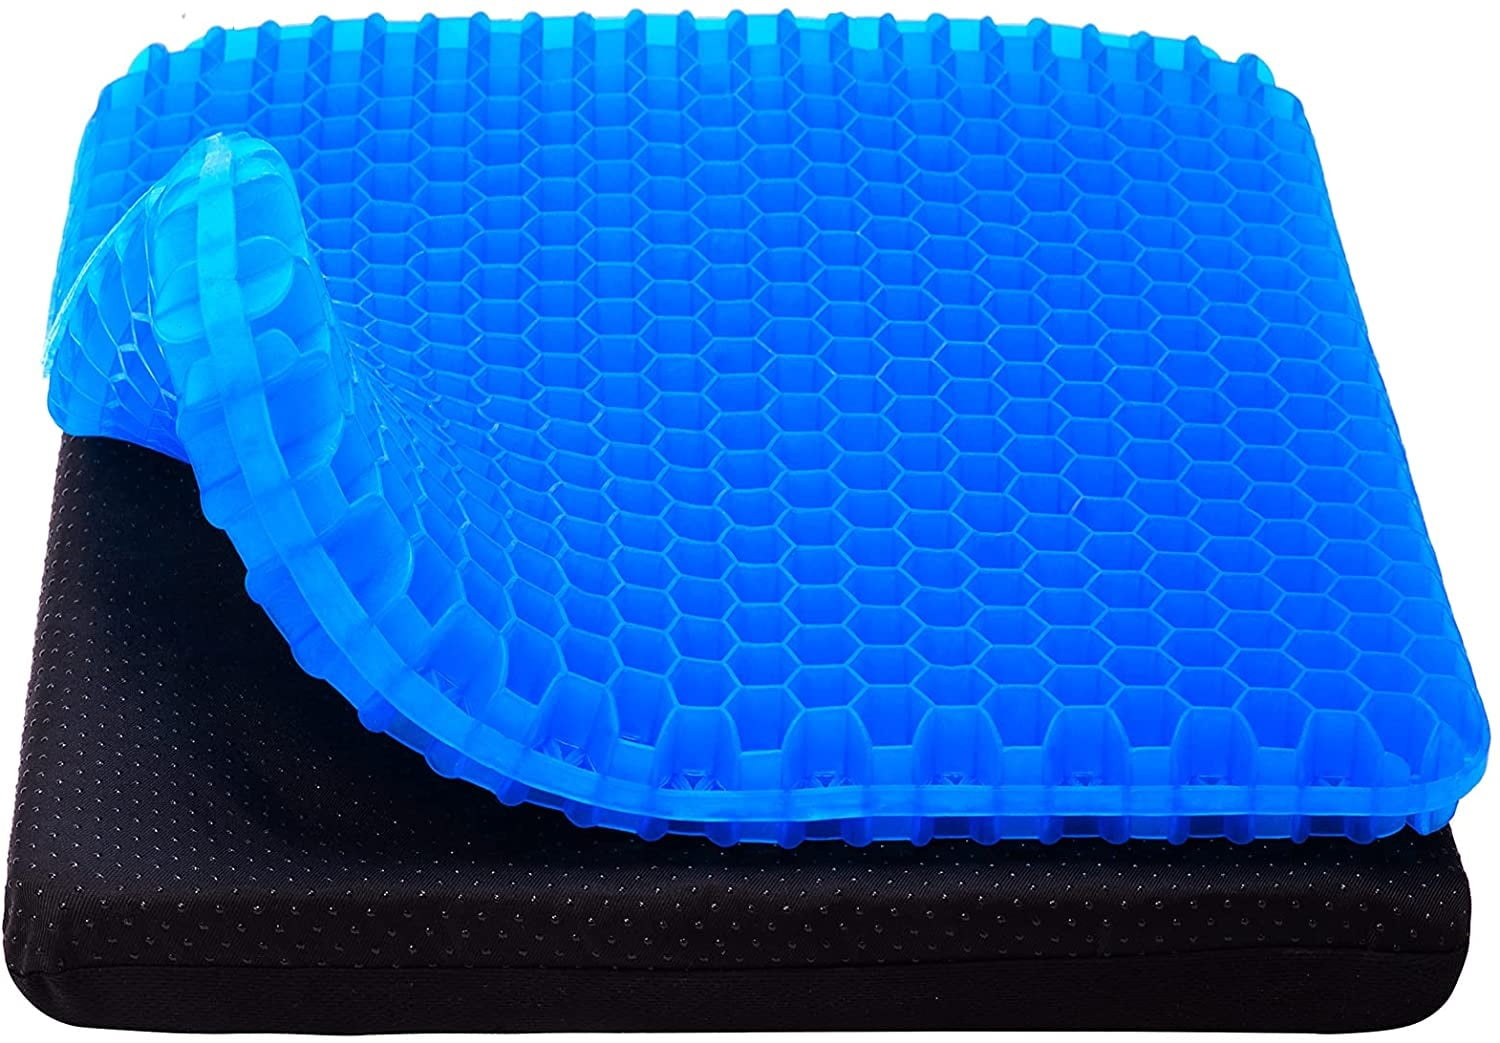 Gel Seat Cushion for Long Sitting - Double Thick Egg Honeycomb Seat Pad  with Non-Slip Washed Cover for Help Relieve Pain, for Office Chair,Game  Chair, Car, Wheelchair, Meditation